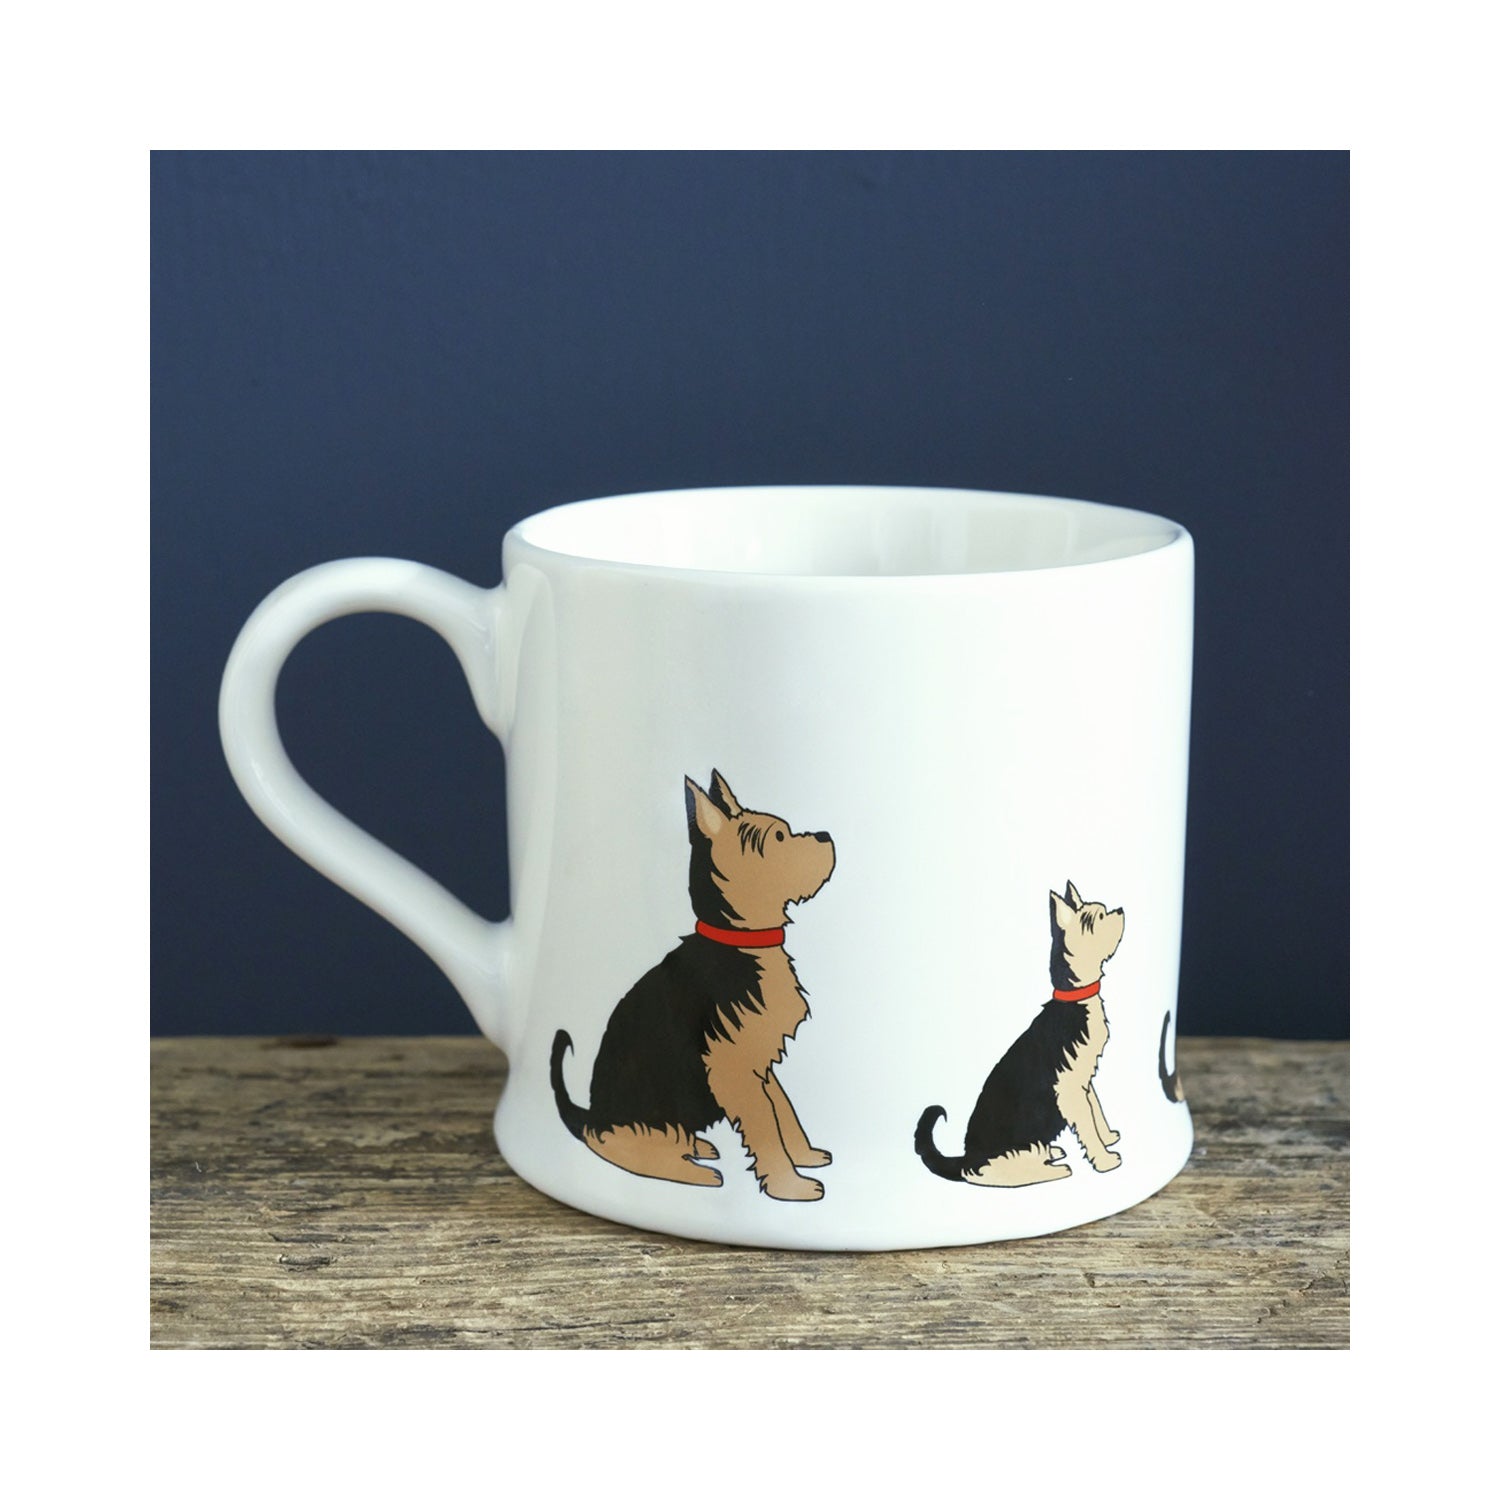 Dog Lover Gifts available at Dog Krazy Gifts - Ella The Yorkshire Terrier Mug - part of the Sweet William range available from Dog Krazy Gifts